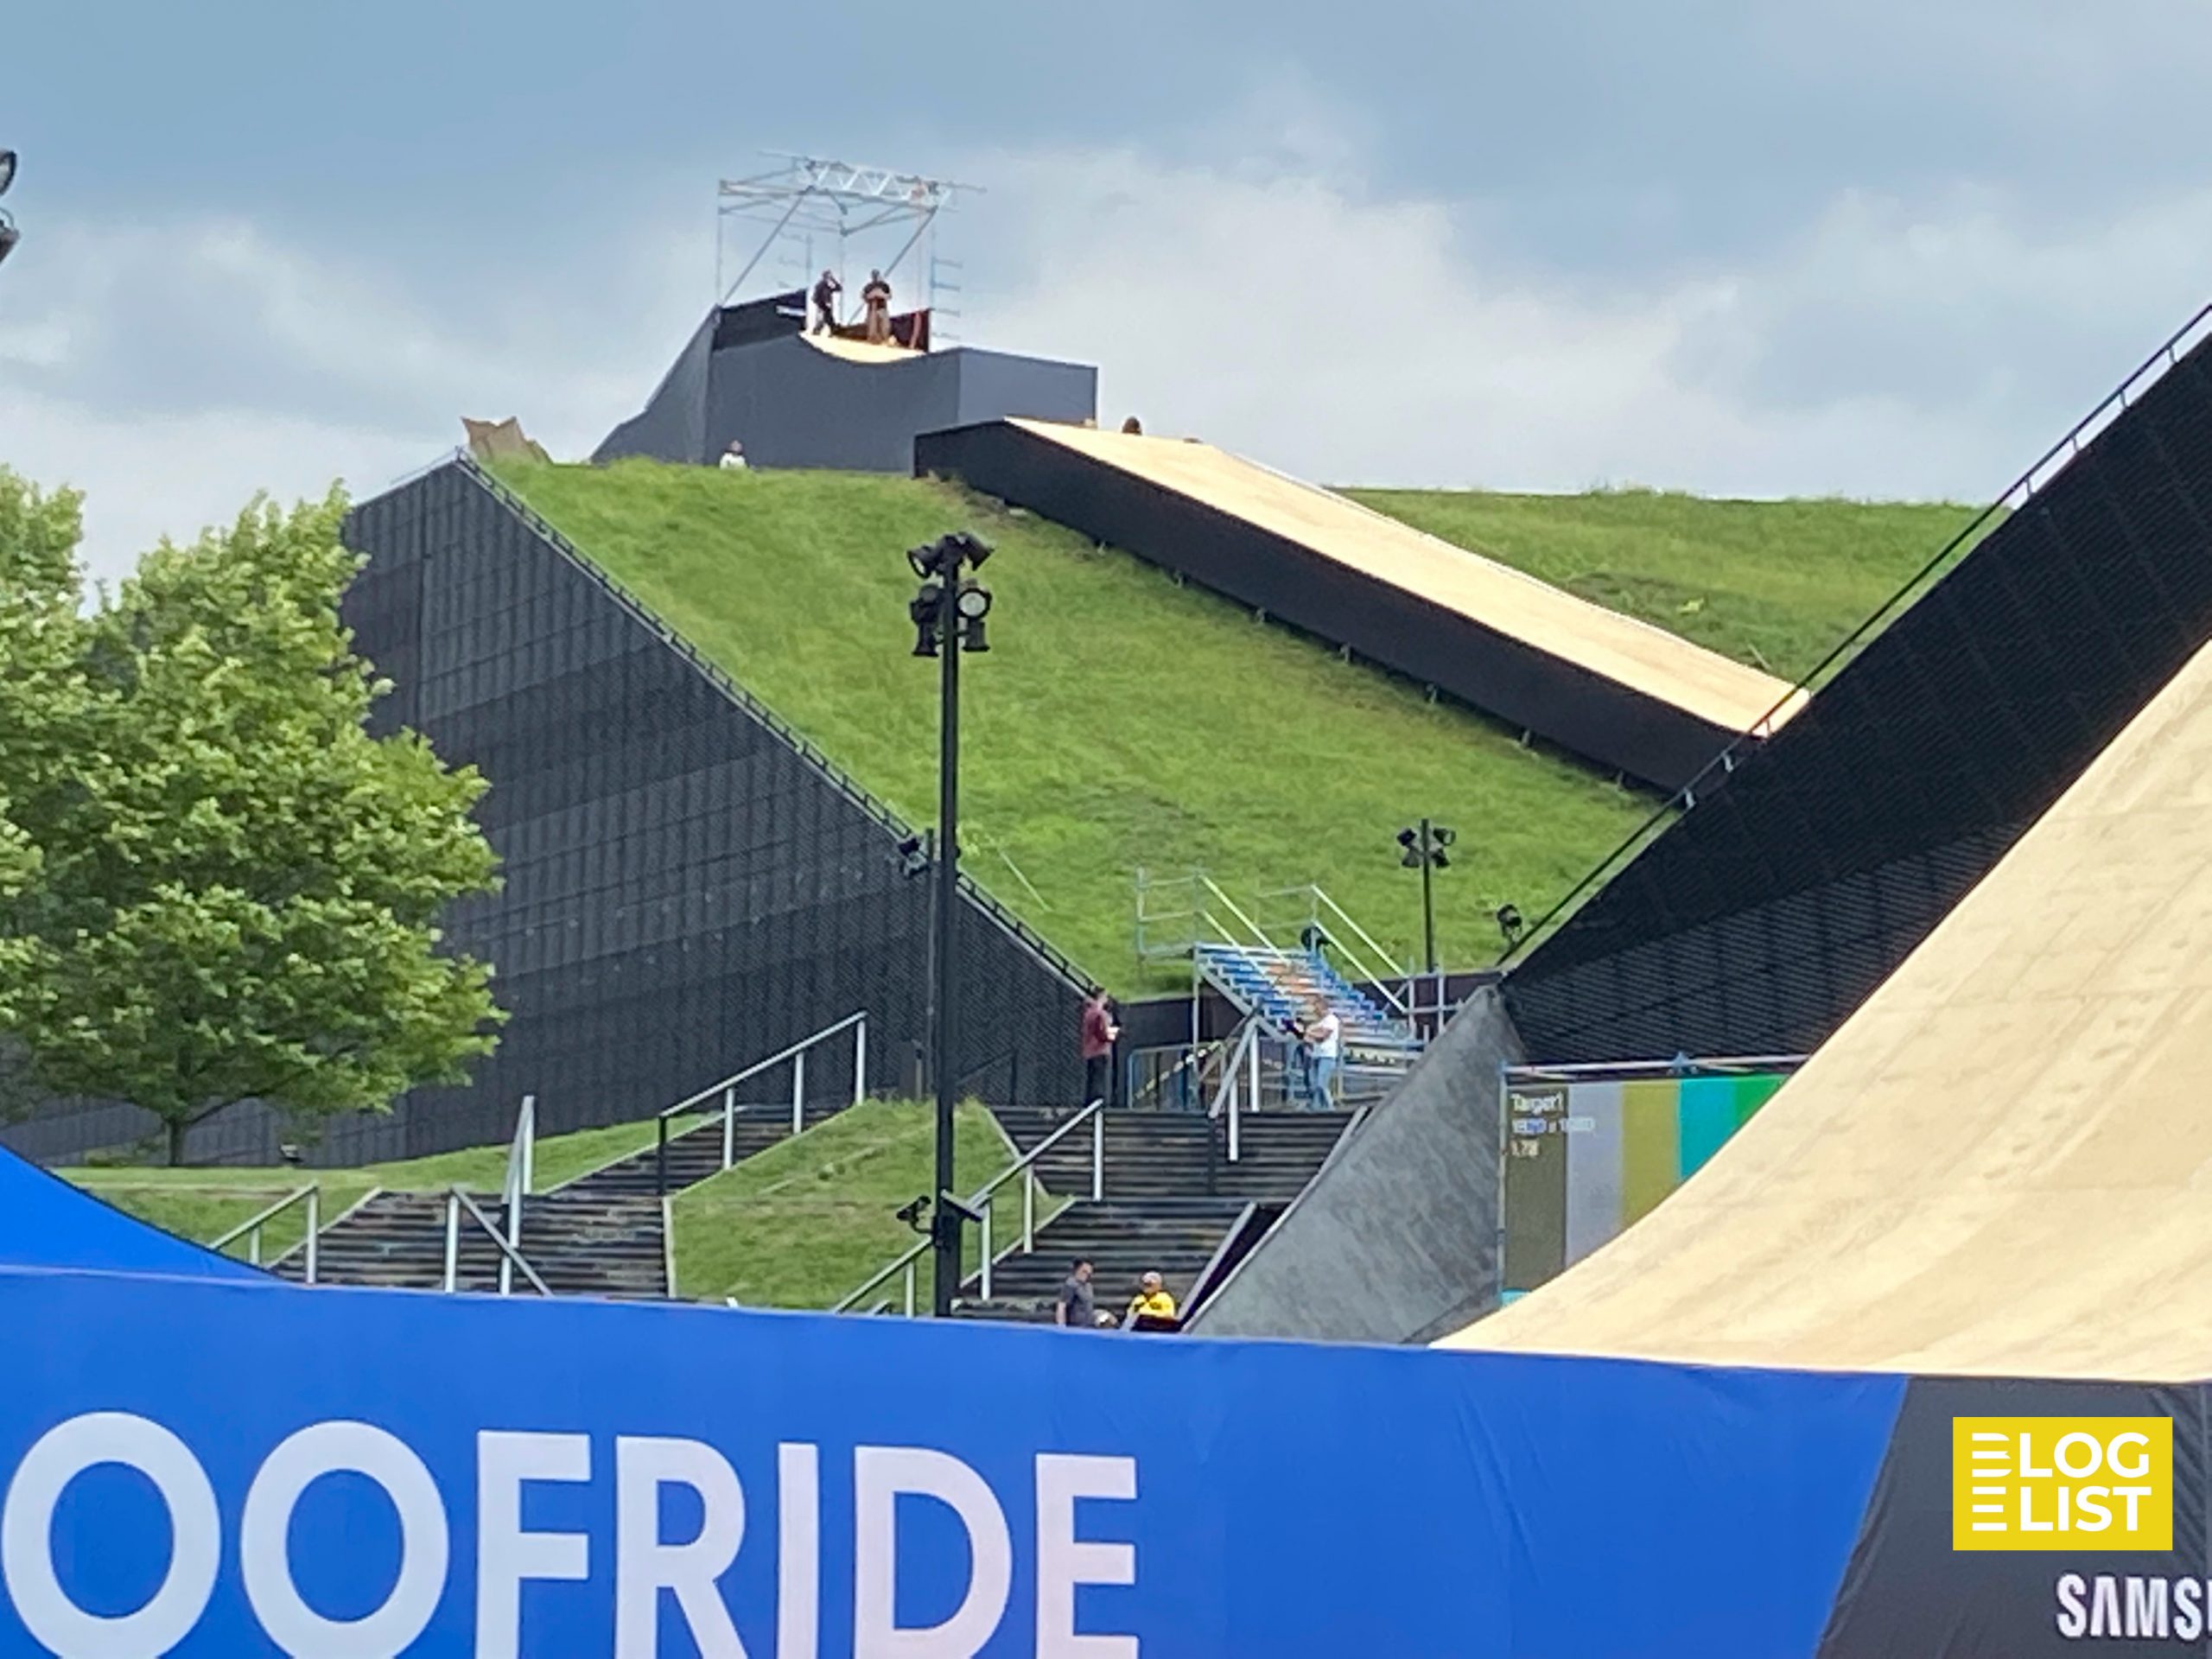 Red Bull Roof Ride 2023 – Weekend of Two Events